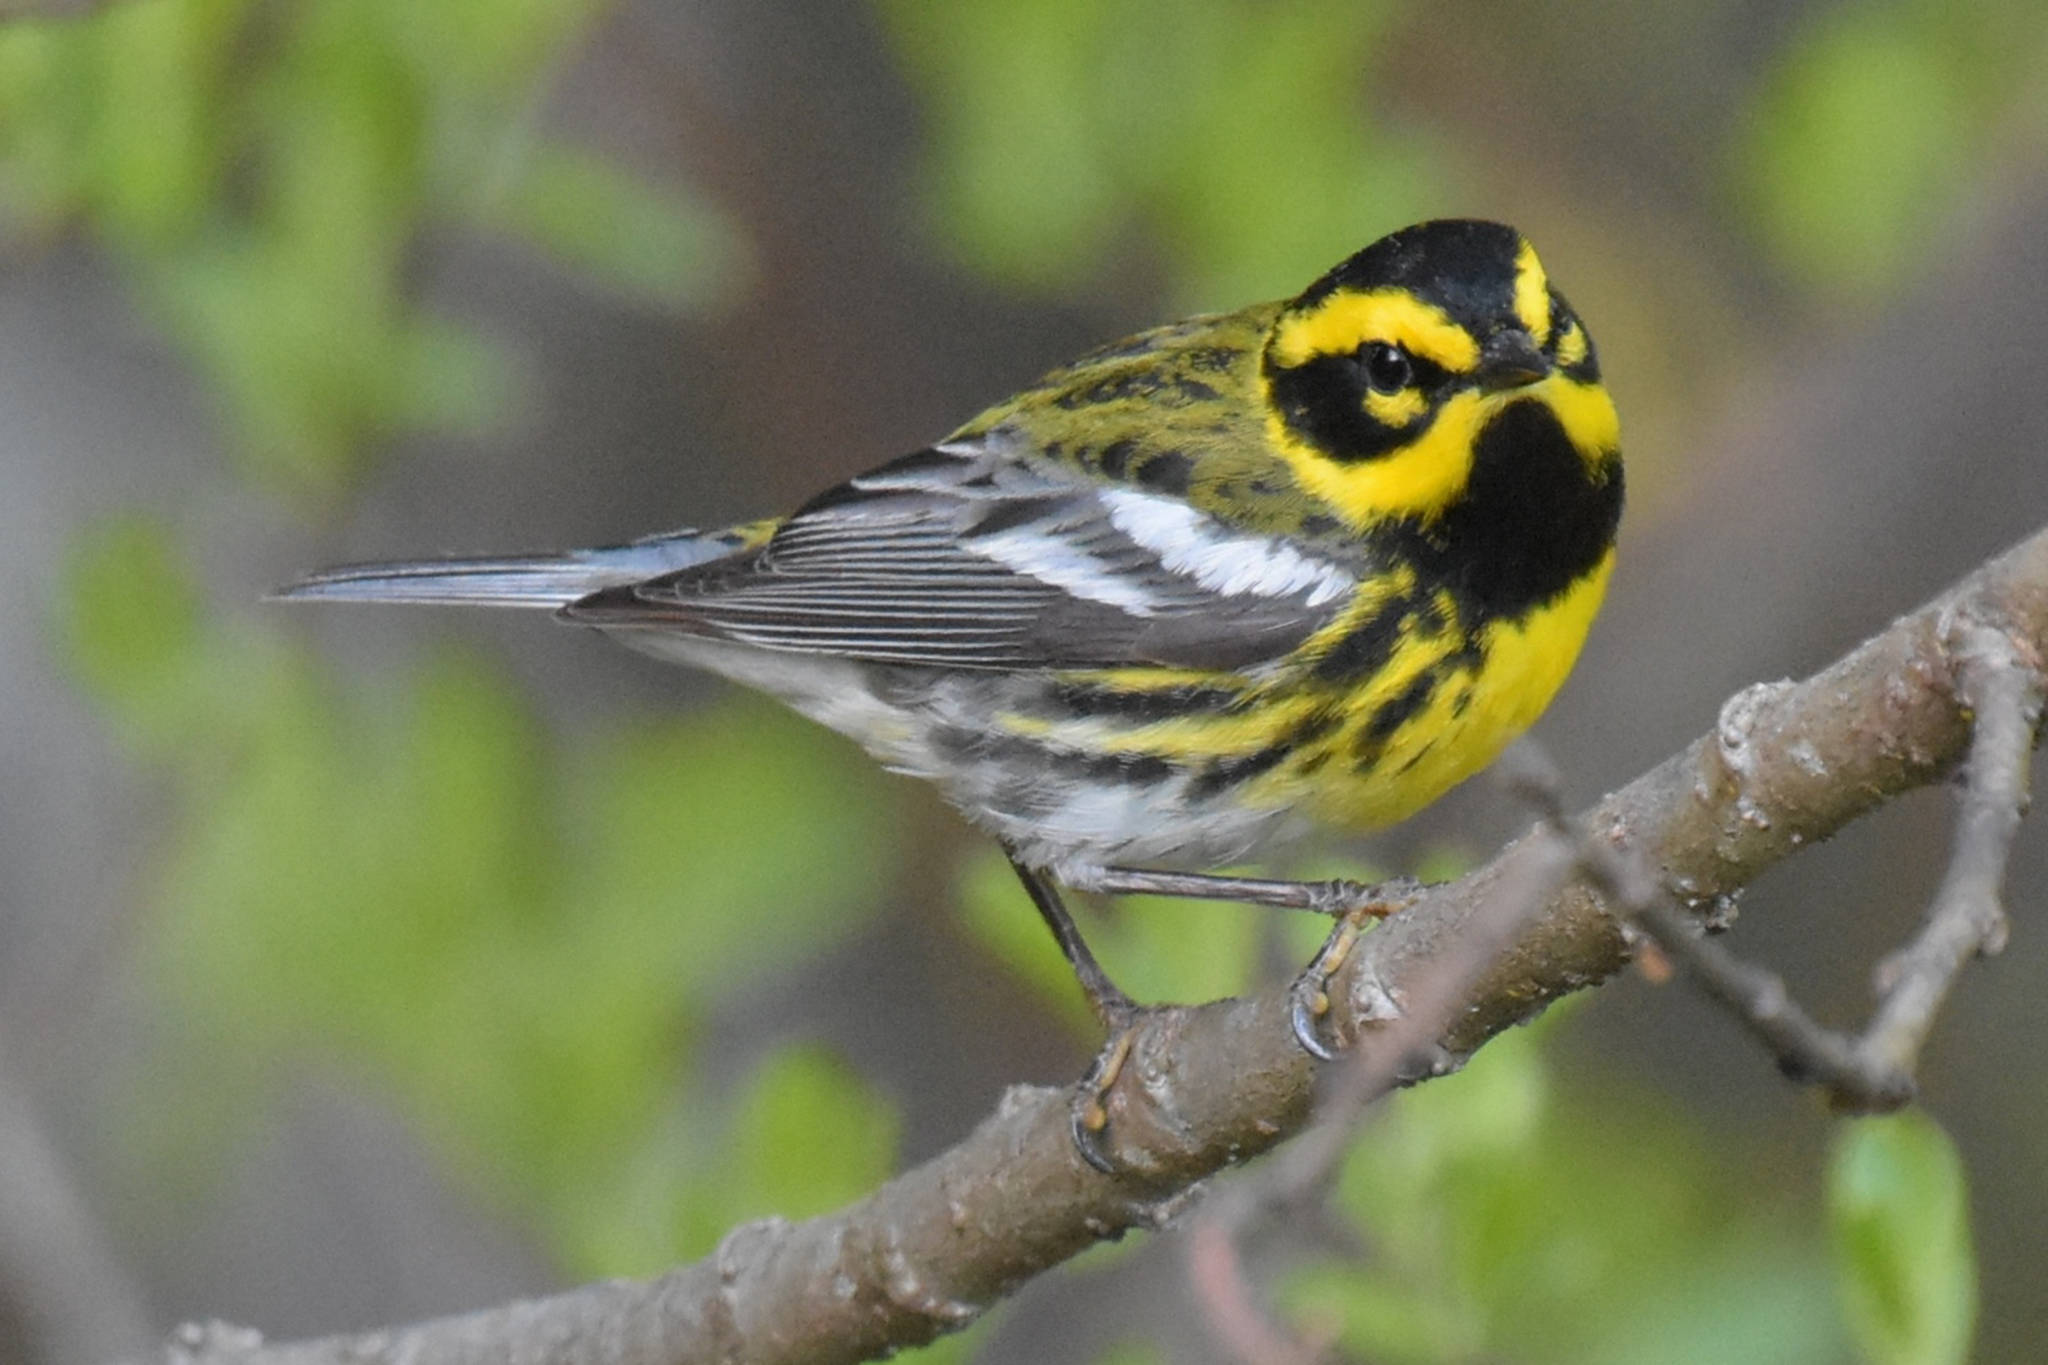 The Townsend’s warbler is a migratory bird that just returned to Juneau. They winter in Mexico and can be found singing on local trails and wooded neighborhoods. (Courtesy Photo | Gwen Baluss)